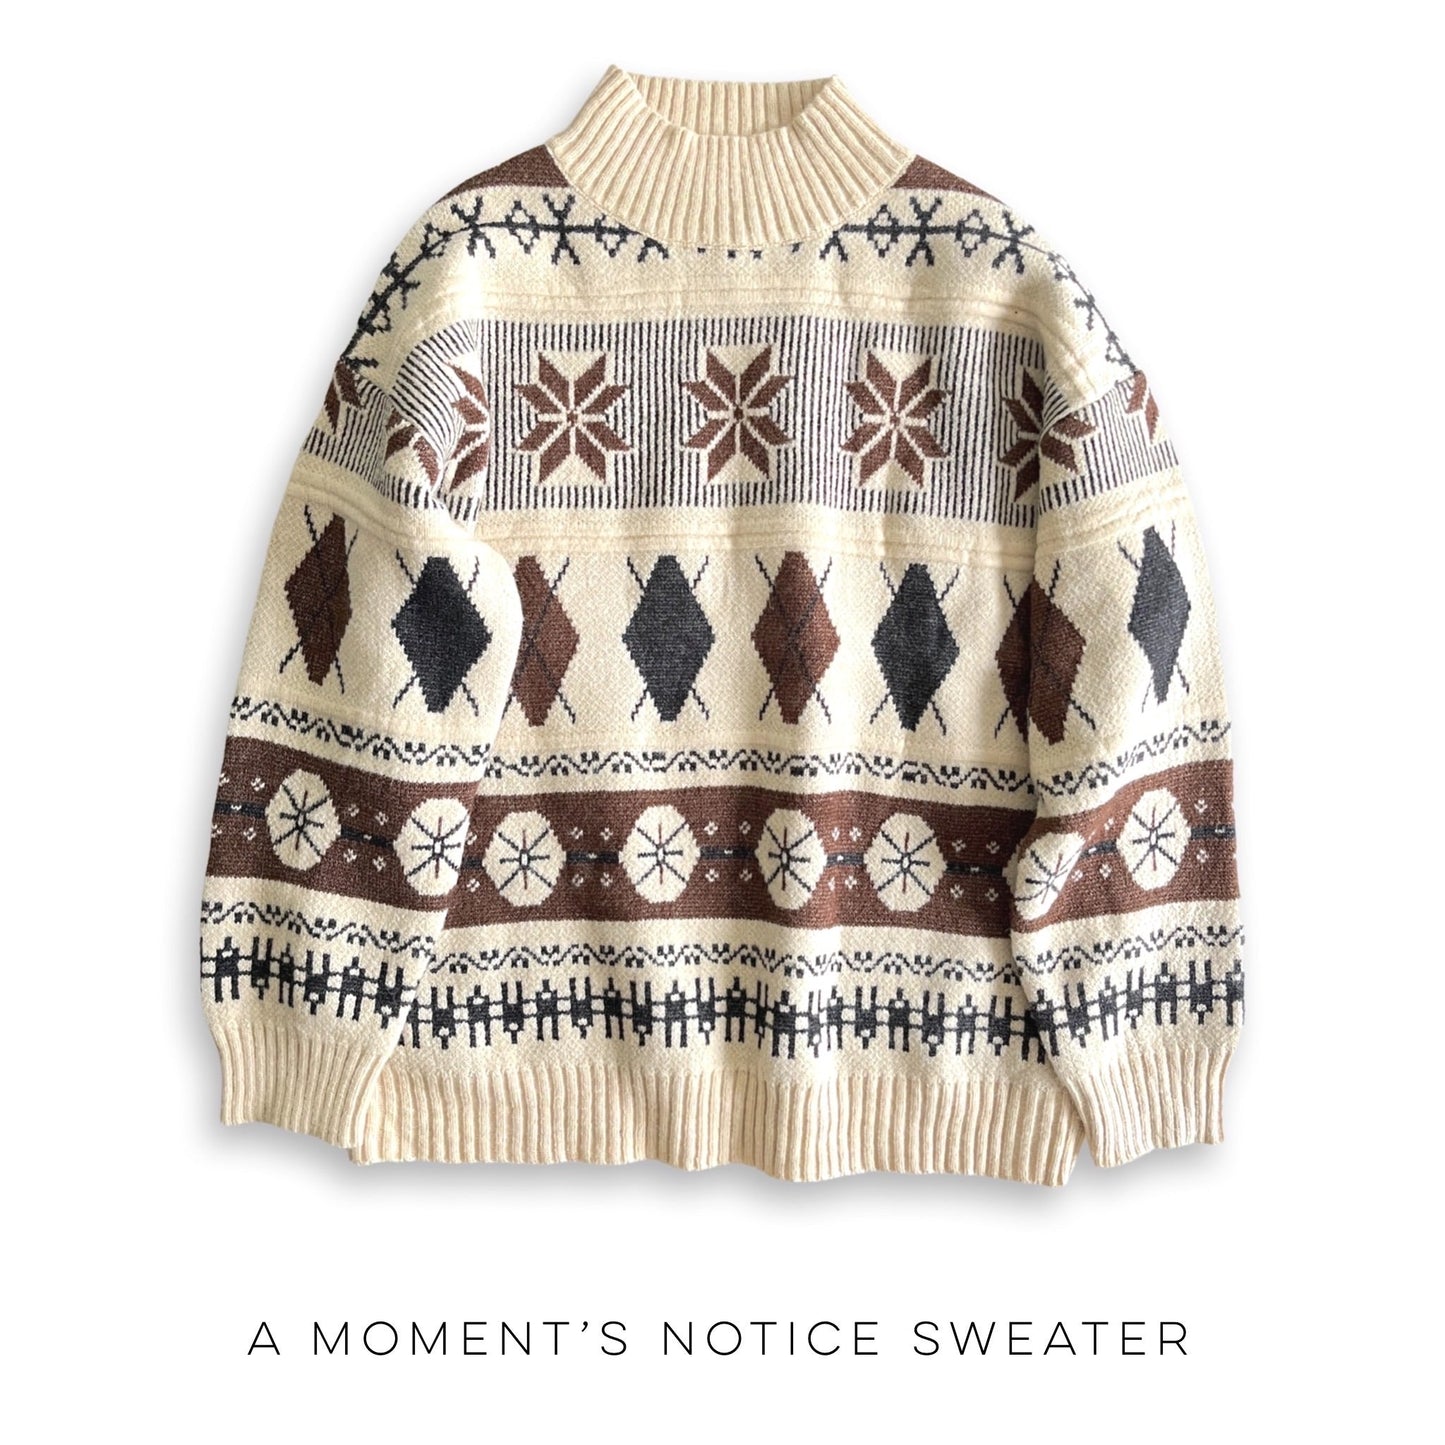 A Moment's Notice Sweater